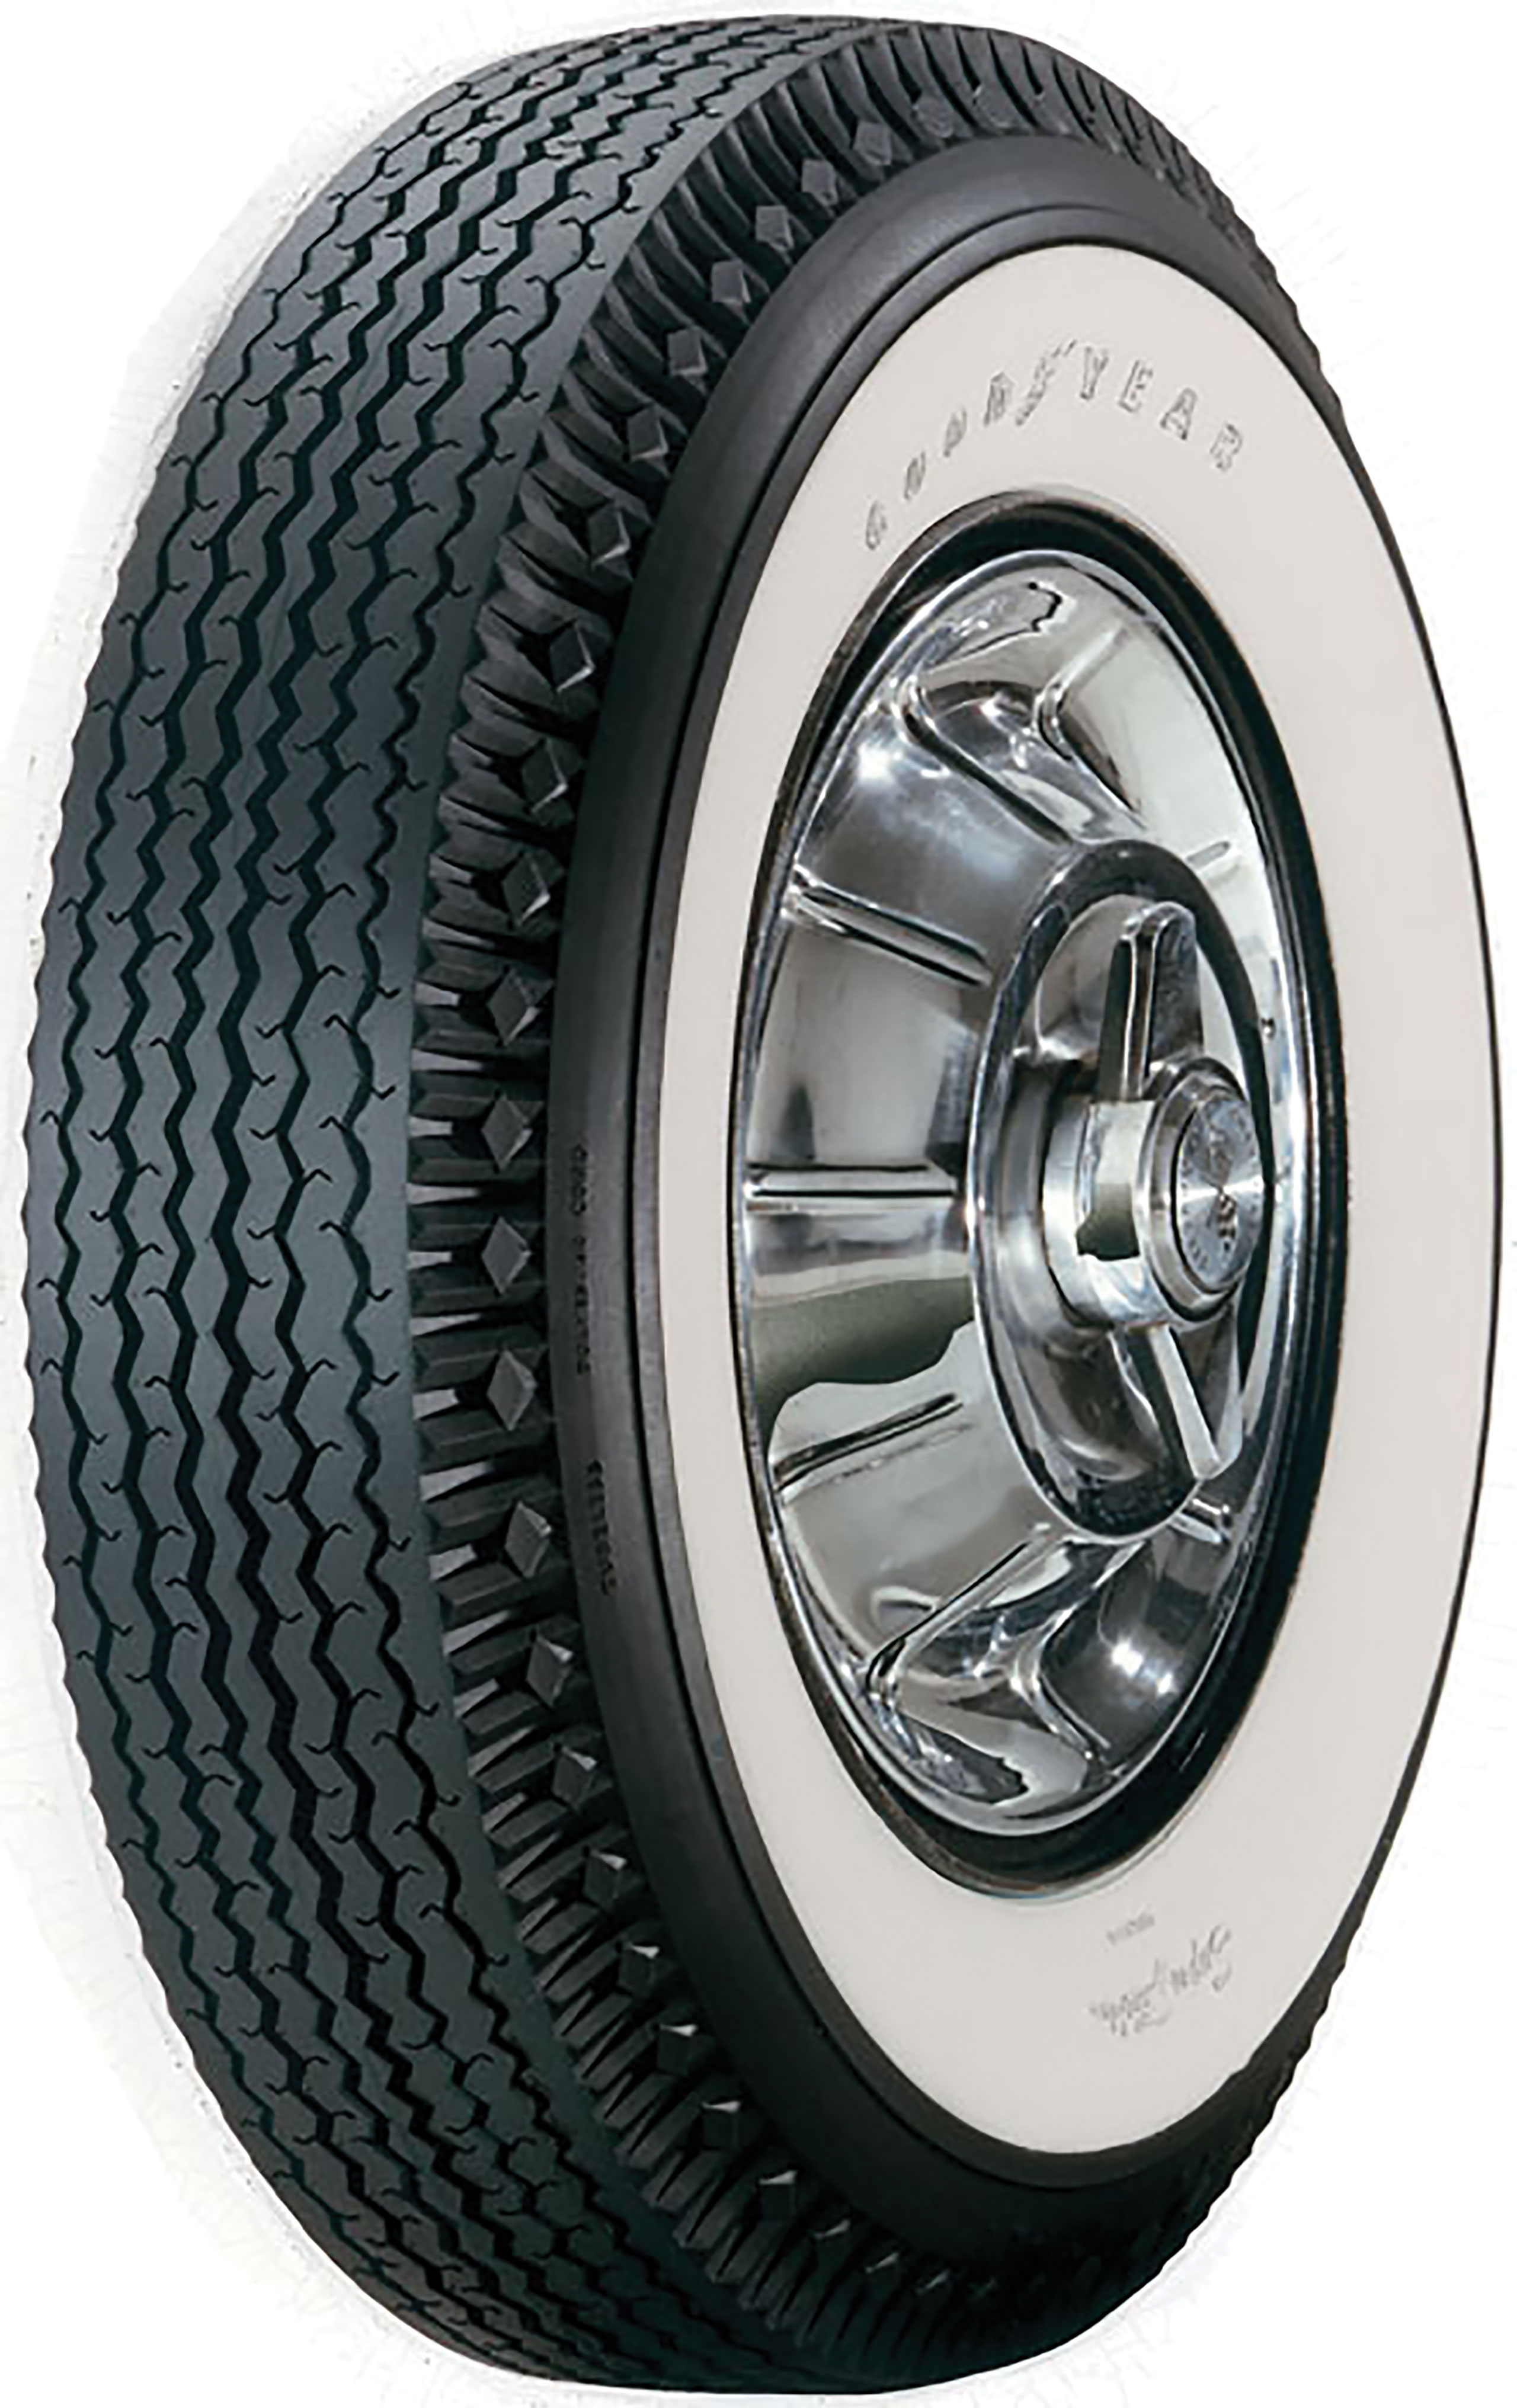 C1 1956-1960 Chevrolet Corvette Tire. Goodyear 6.70 X 15 - 4 Ply Poly - 2 11/16 Inch White Wall - Goodyear Tires